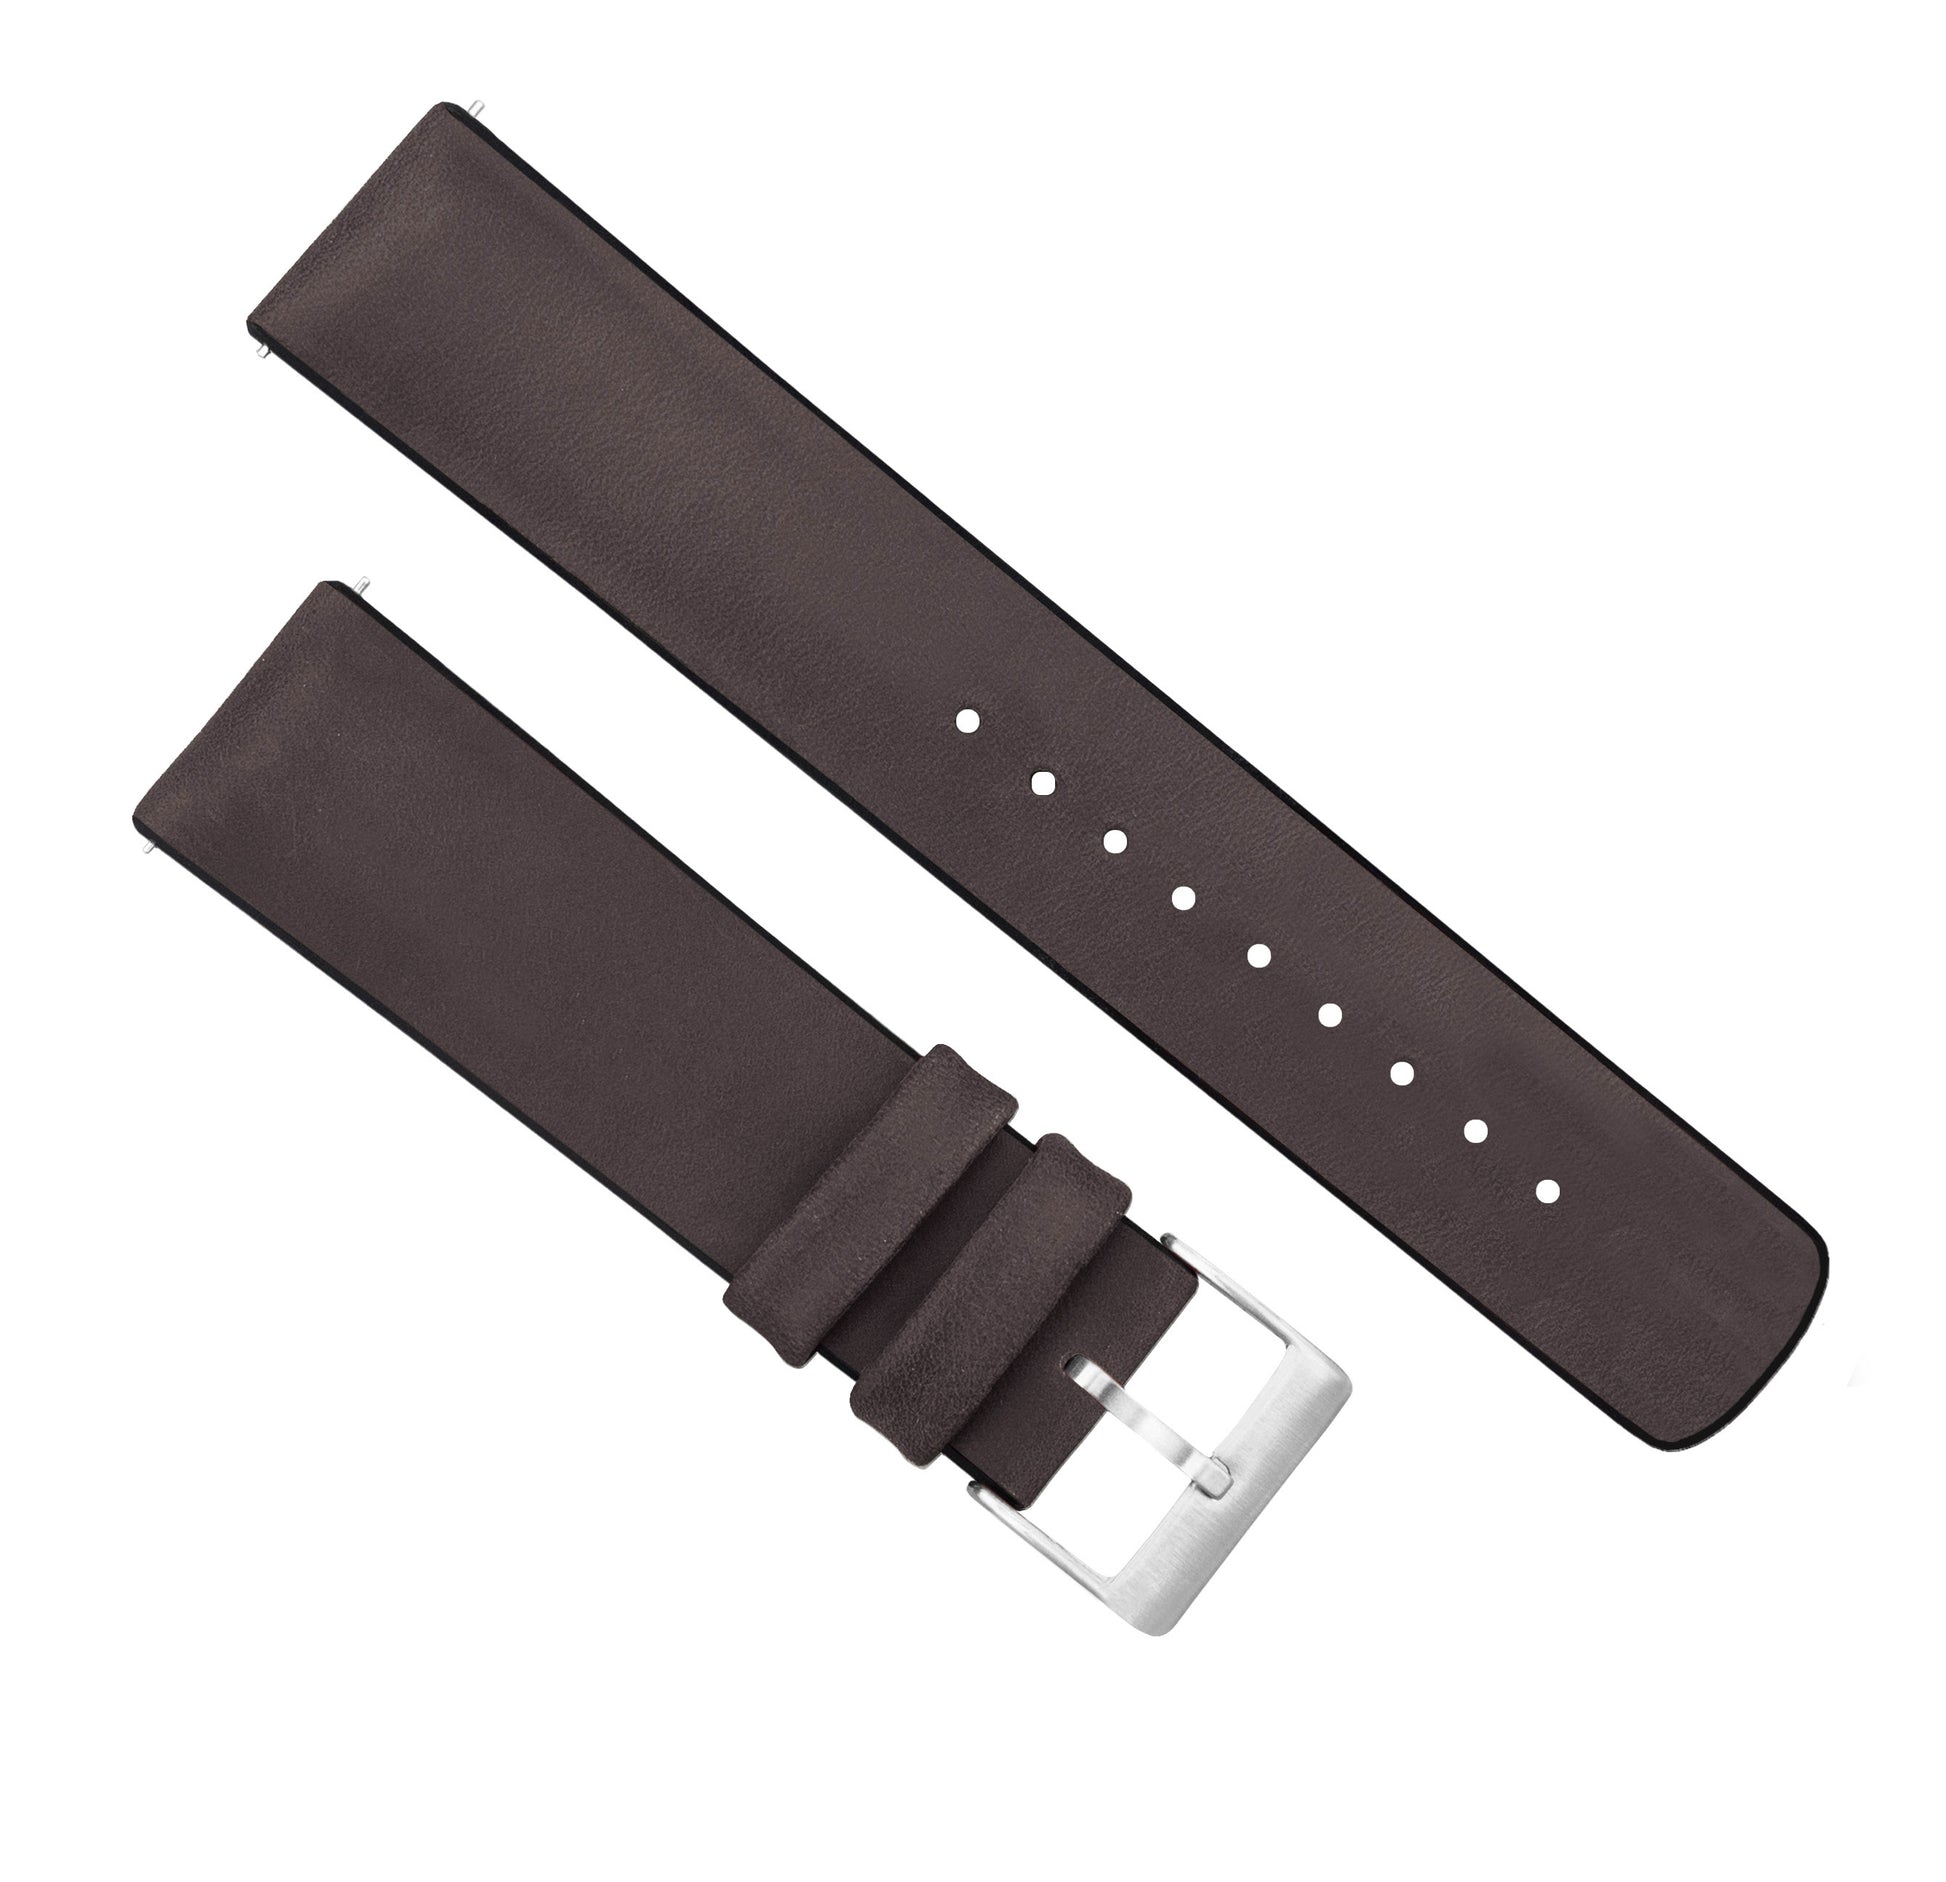 Samsung Galaxy Watch | Leather and Rubber Hybrid | Smoke Brown - Barton Watch Bands